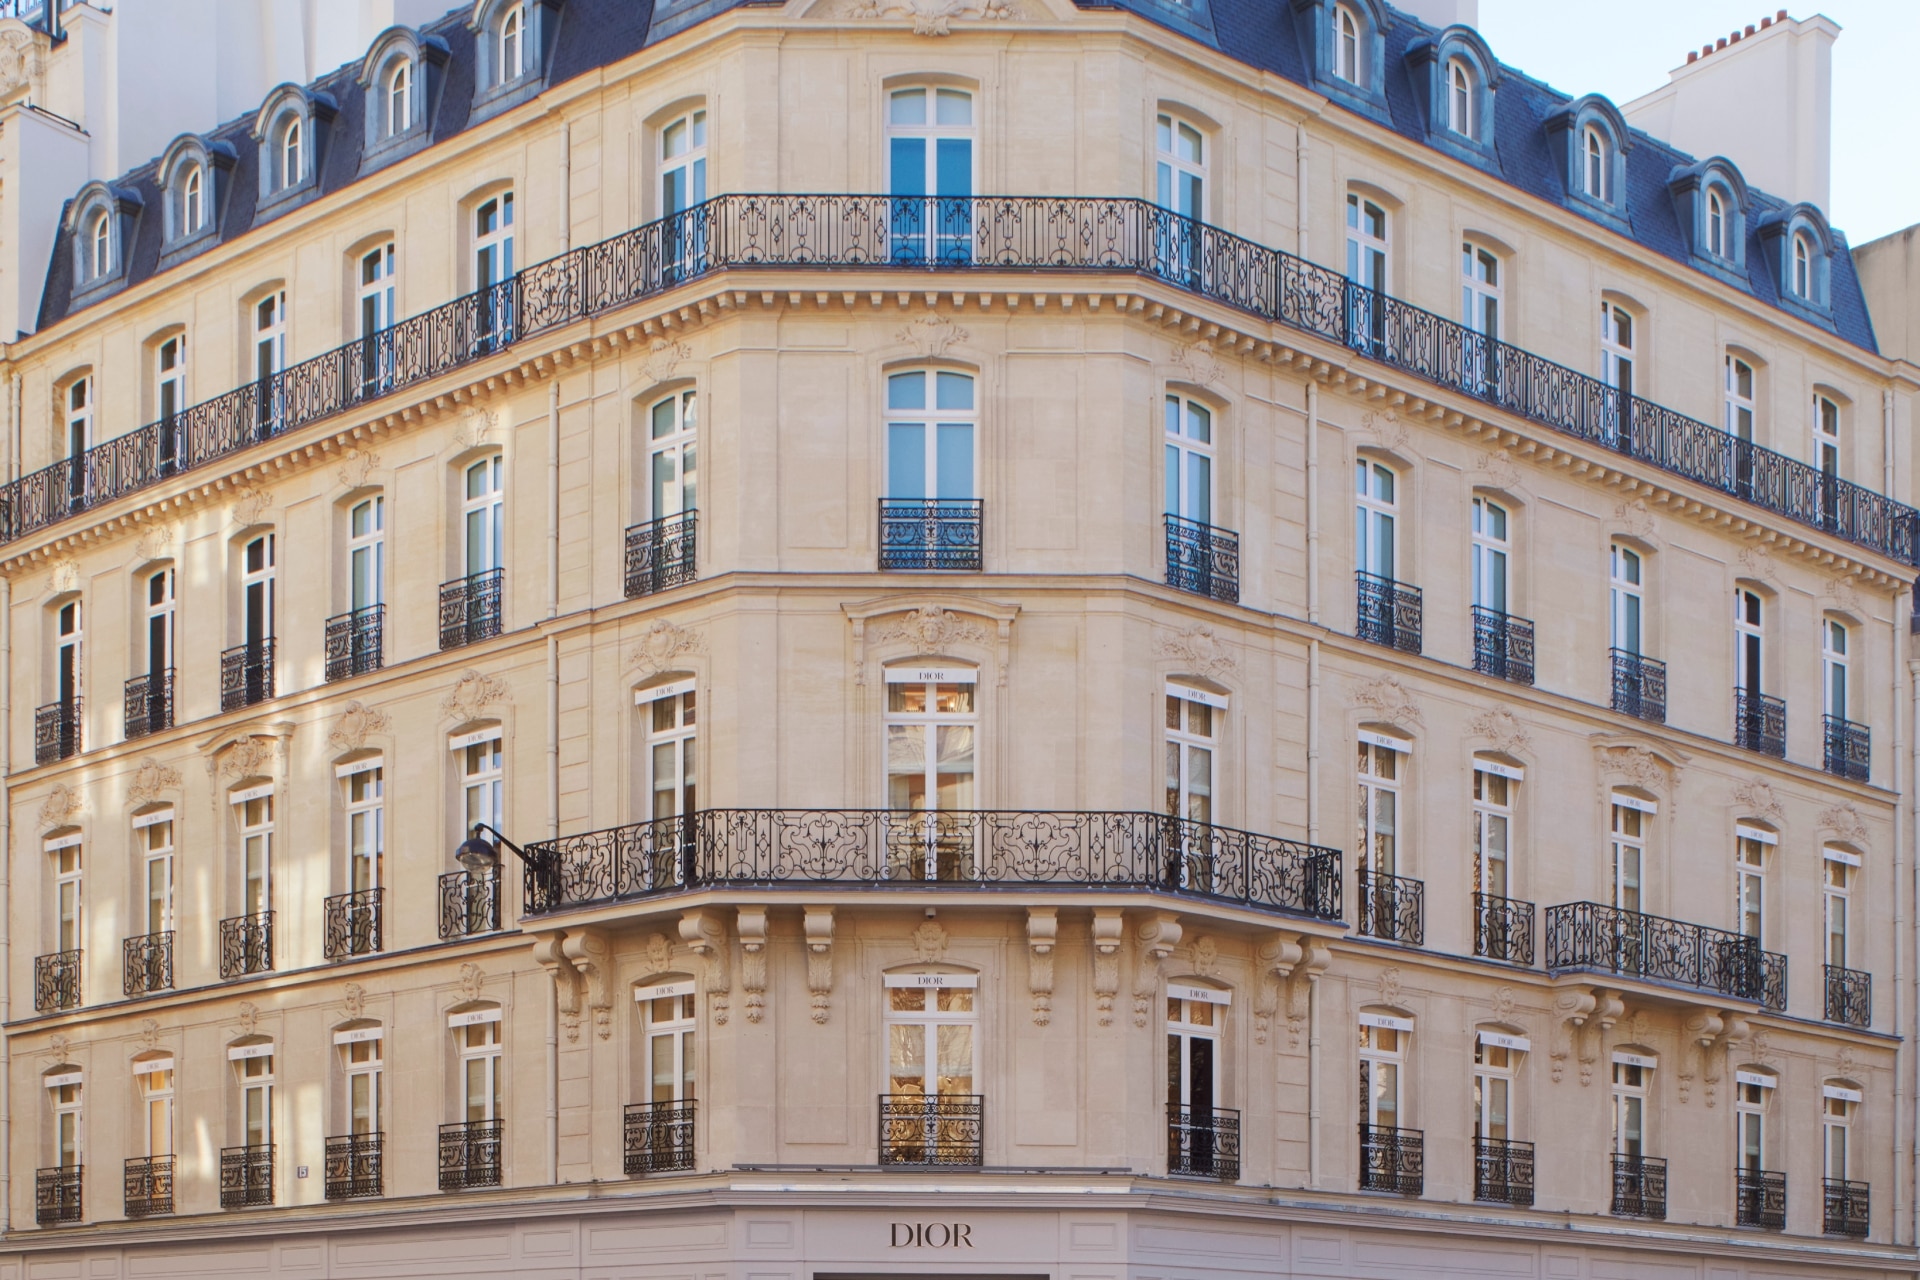 Dior's iconic Paris address at 30 Avenue Montaigne has a new look